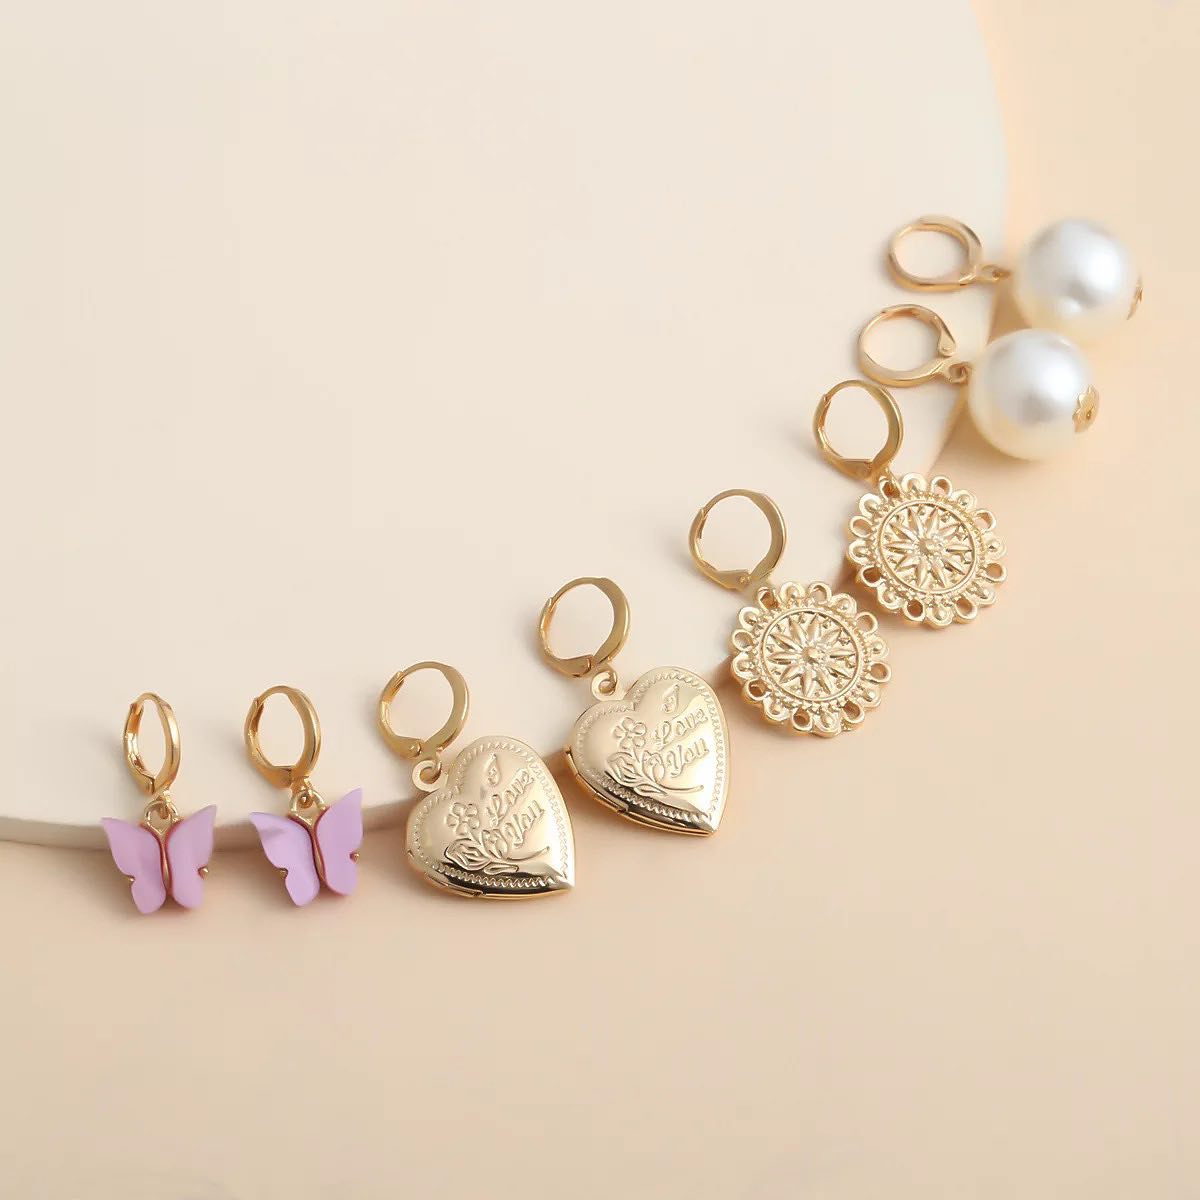 We cannot get enough of these cute little baubles from our latest collection of Huggies

#inayaaccessories #earringsoftheweek #huggieearrings #huggies #heartearrings #butterflyearrings #pearlearringsَ #sunearrings #butterlyjewellery #earringset #earringsets #luyanalu